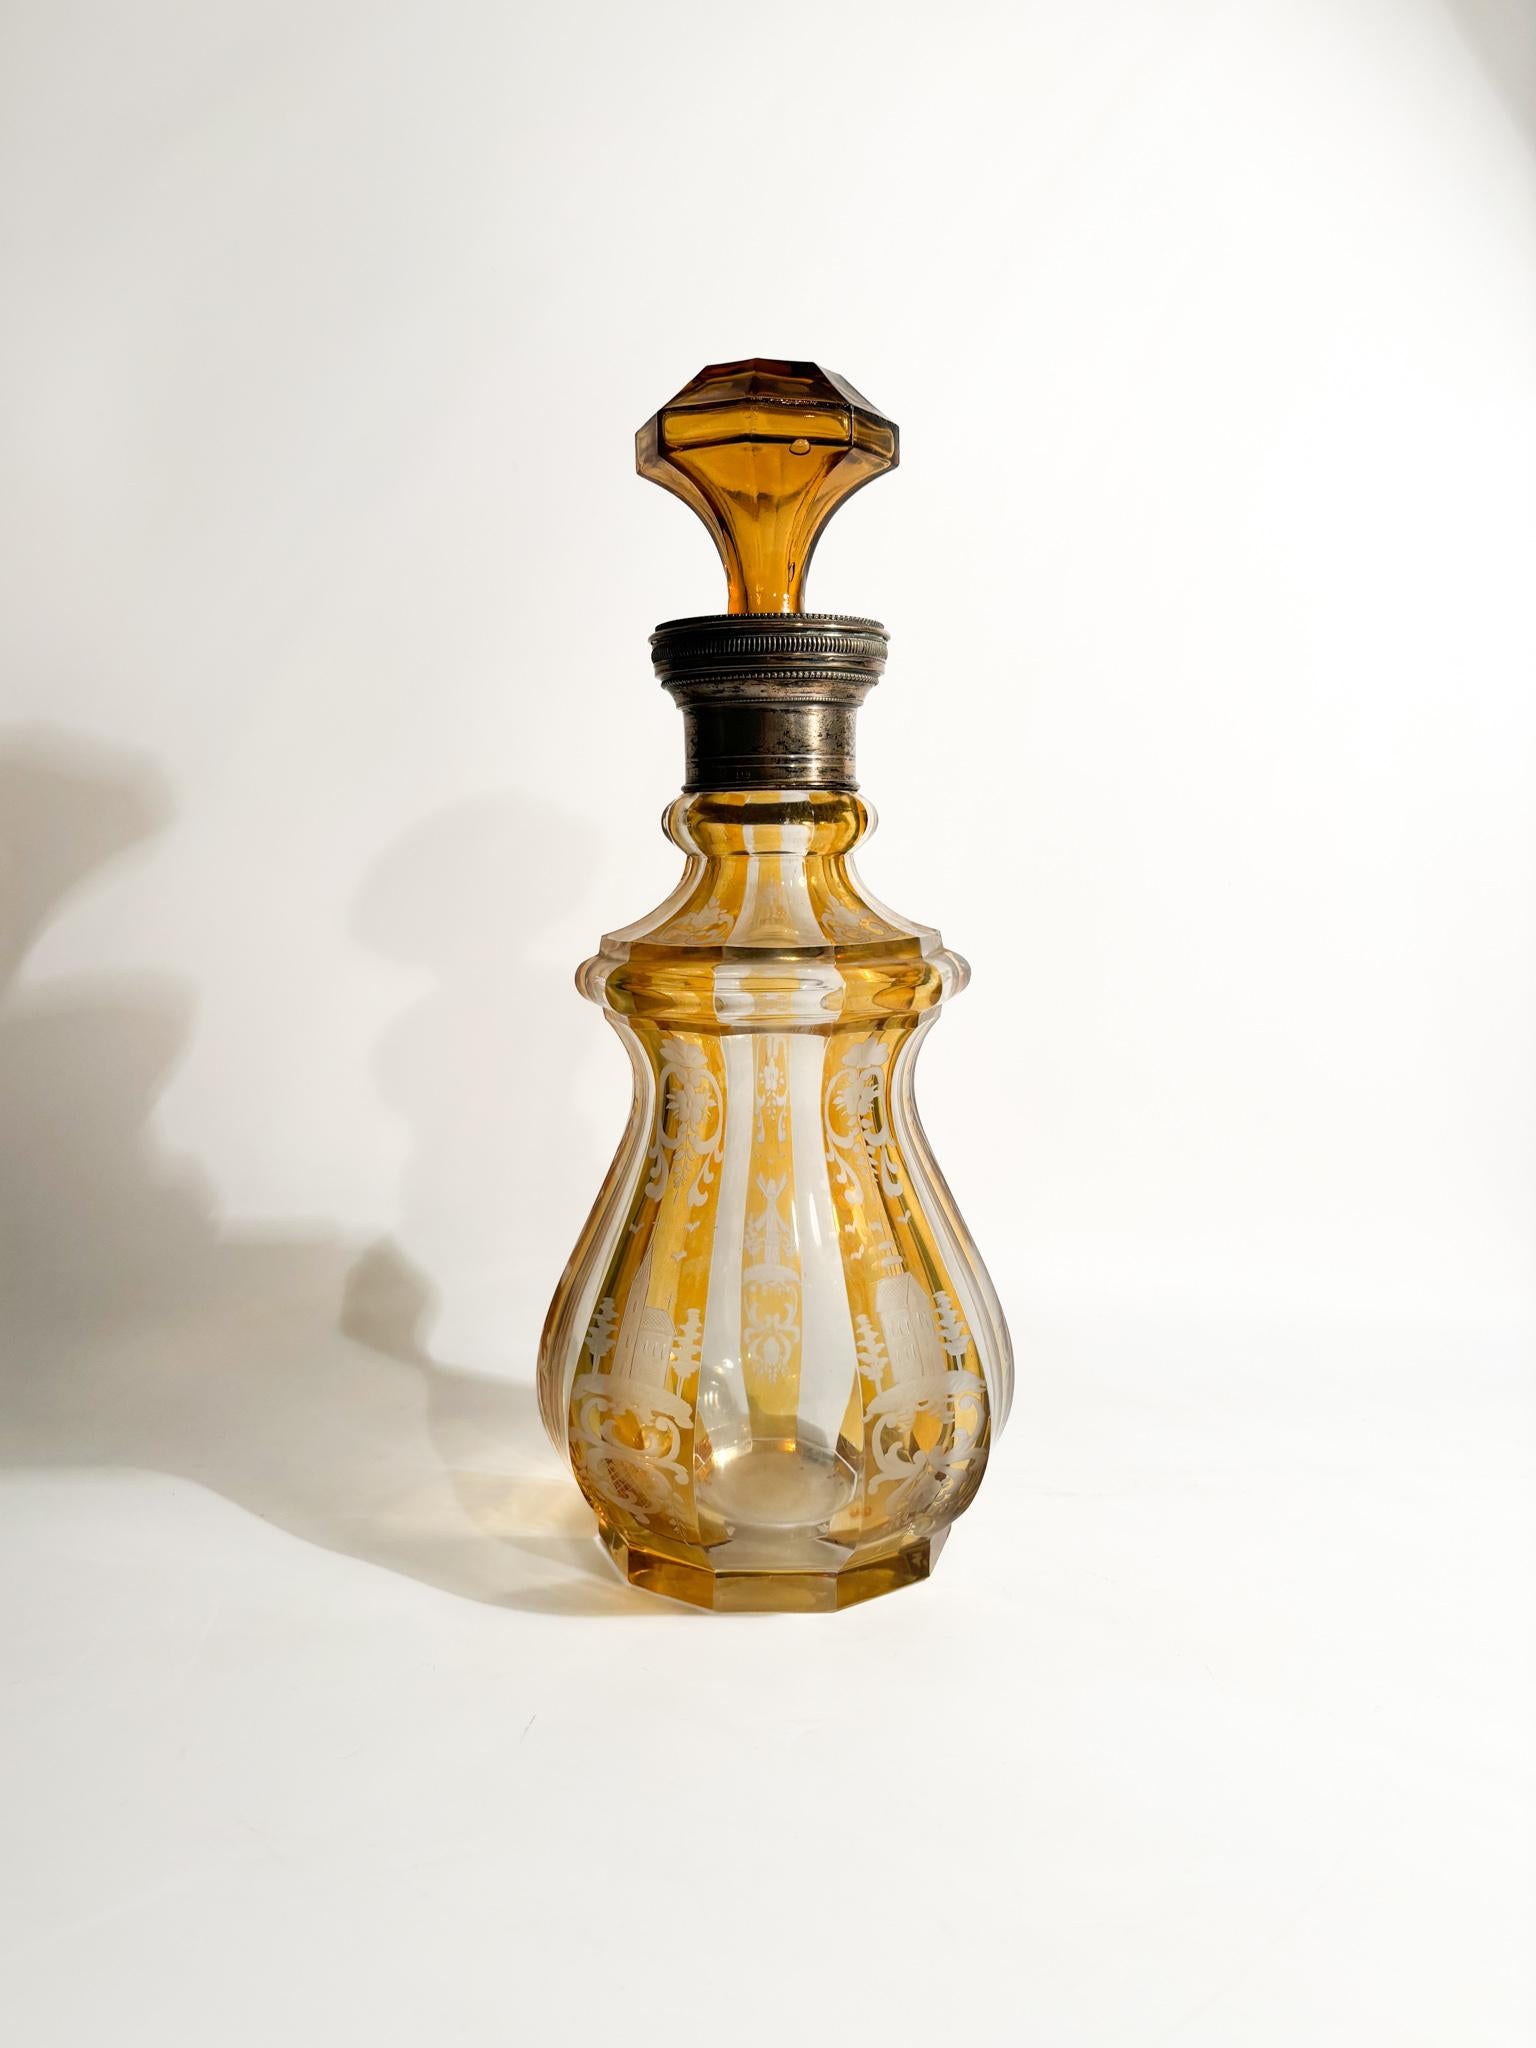 Orange and silver Biedermeier crystal bottle, made in 1800

Ø cm 25 h cm 54

Biedermeier is was an artistic movement that developed between 1815 and 1848. The term initially spread as a derogatory term. Consisting of two words: the adjective bieder,